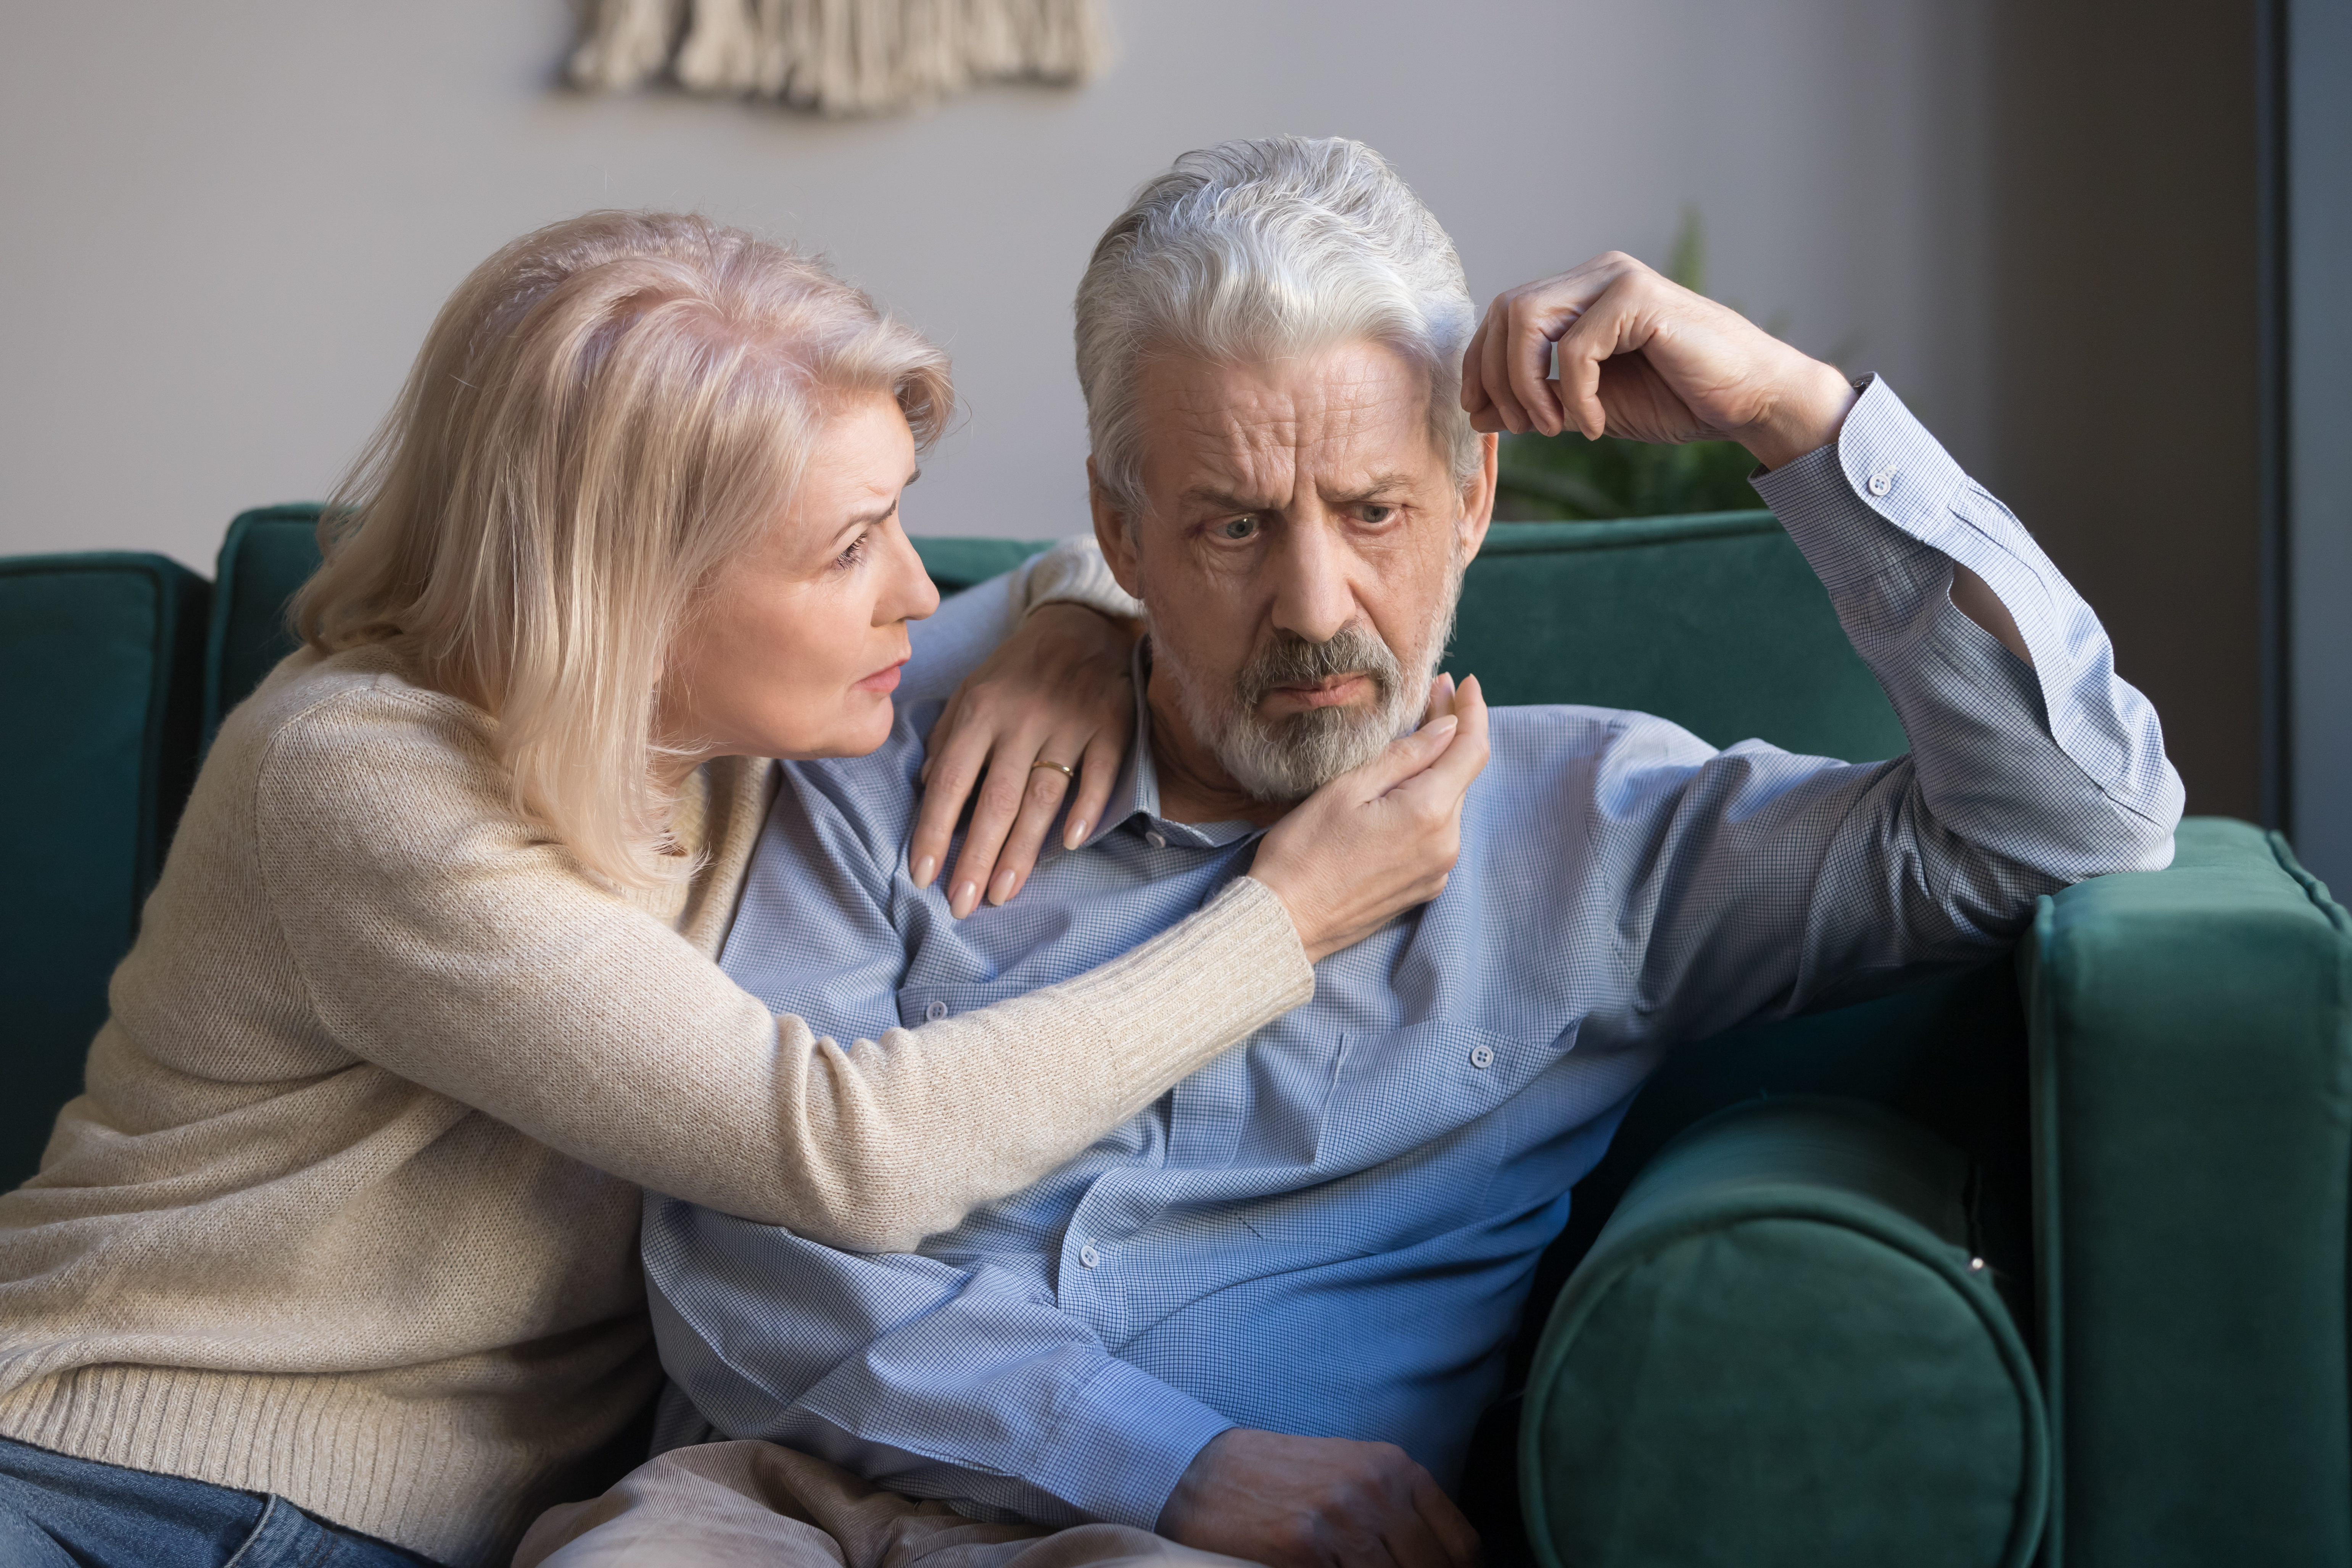 A middle aged wife comforting her upset grey-haired husband | Source: Shutterstock